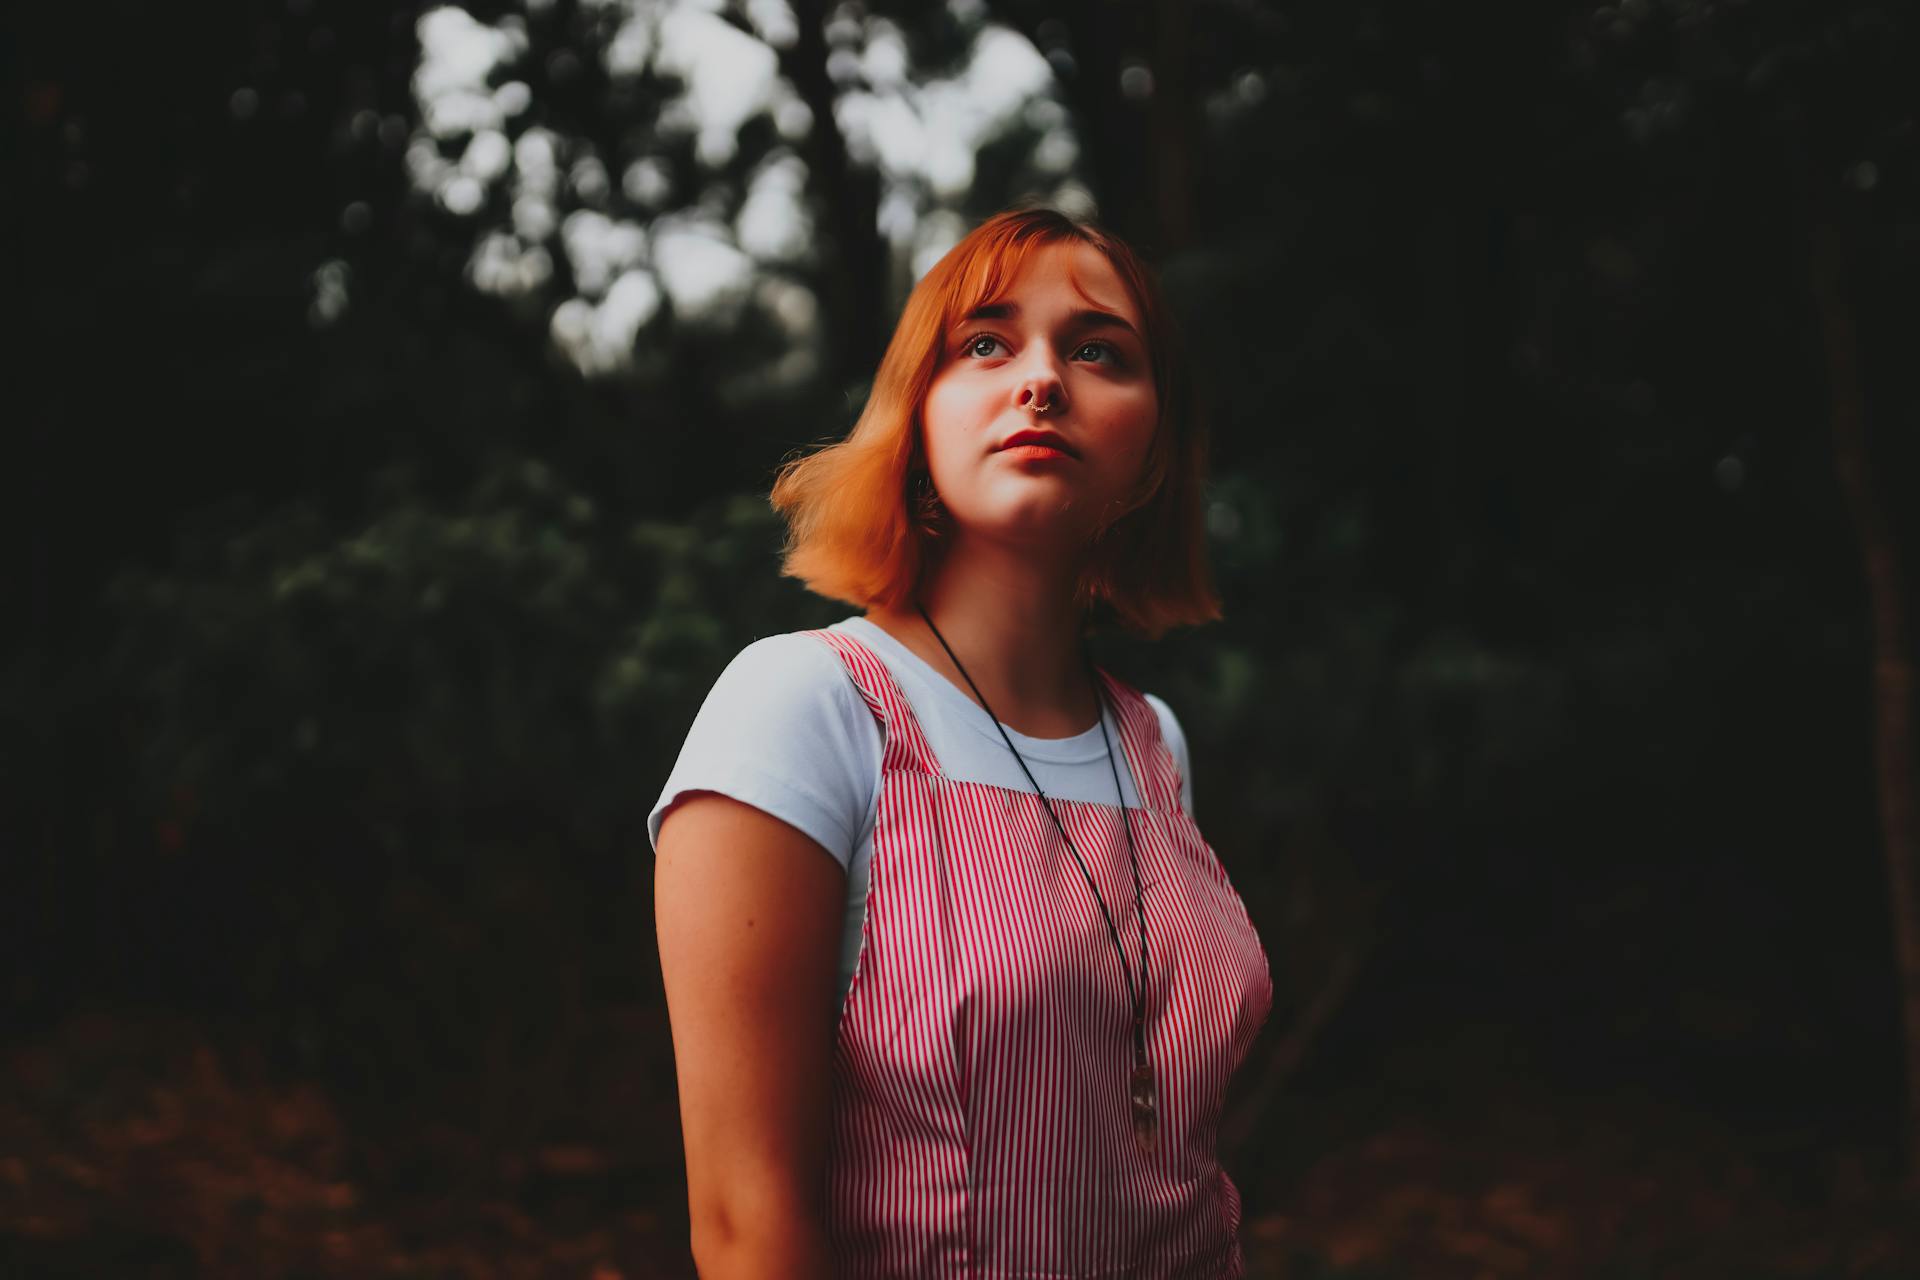 A young woman wearing overalls | Source: Pexels